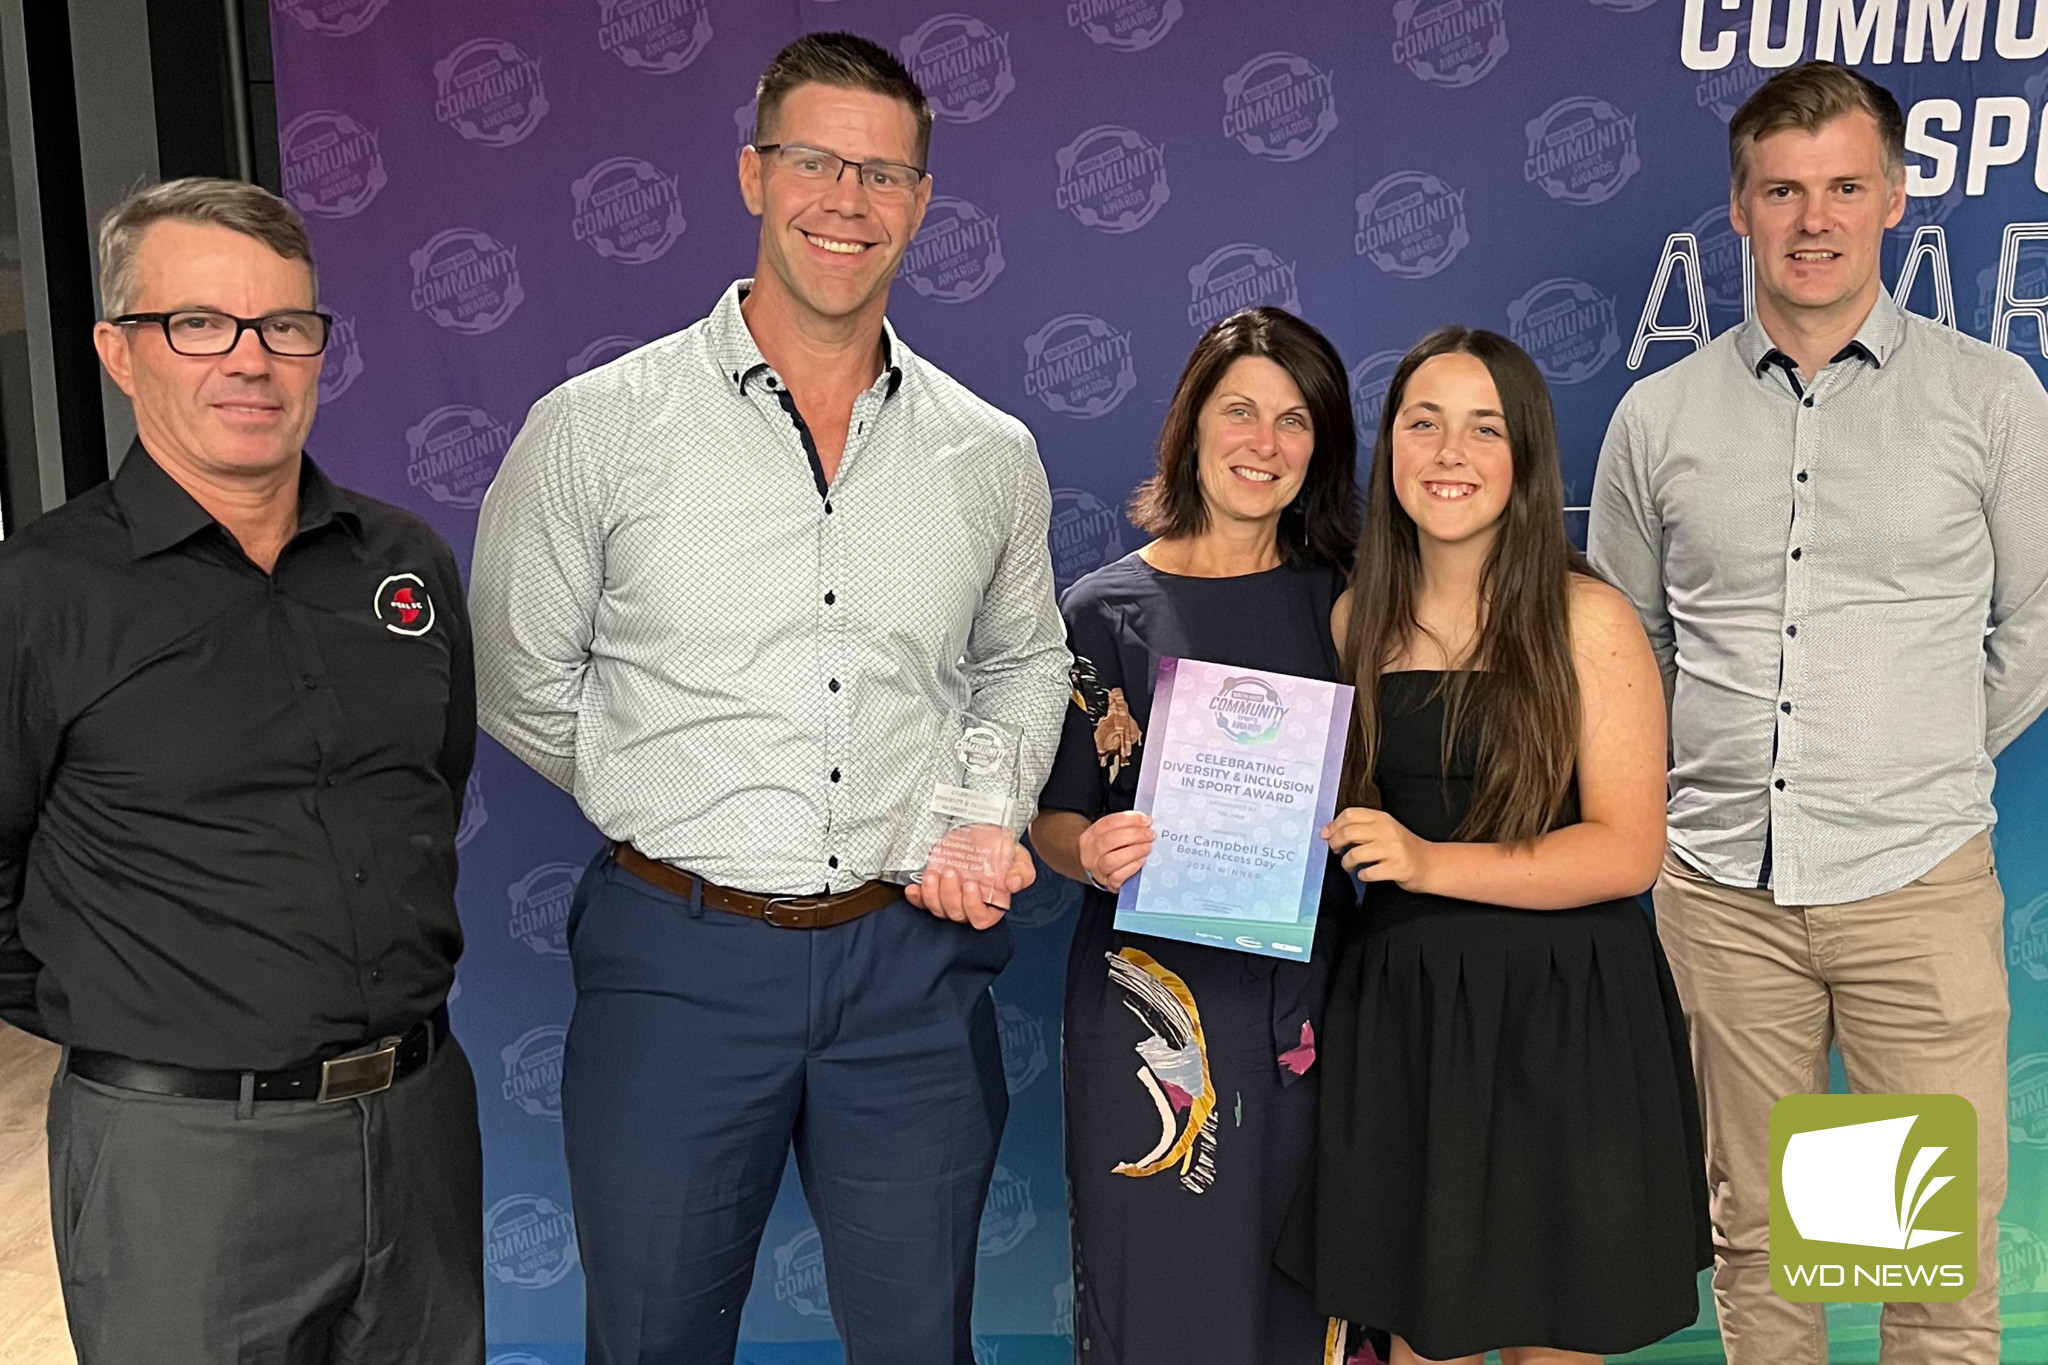 Representatives from the Port Campbell Surf Life Saving Club with their award for ‘Celebrating Diversity and Inclusion in Sport.’